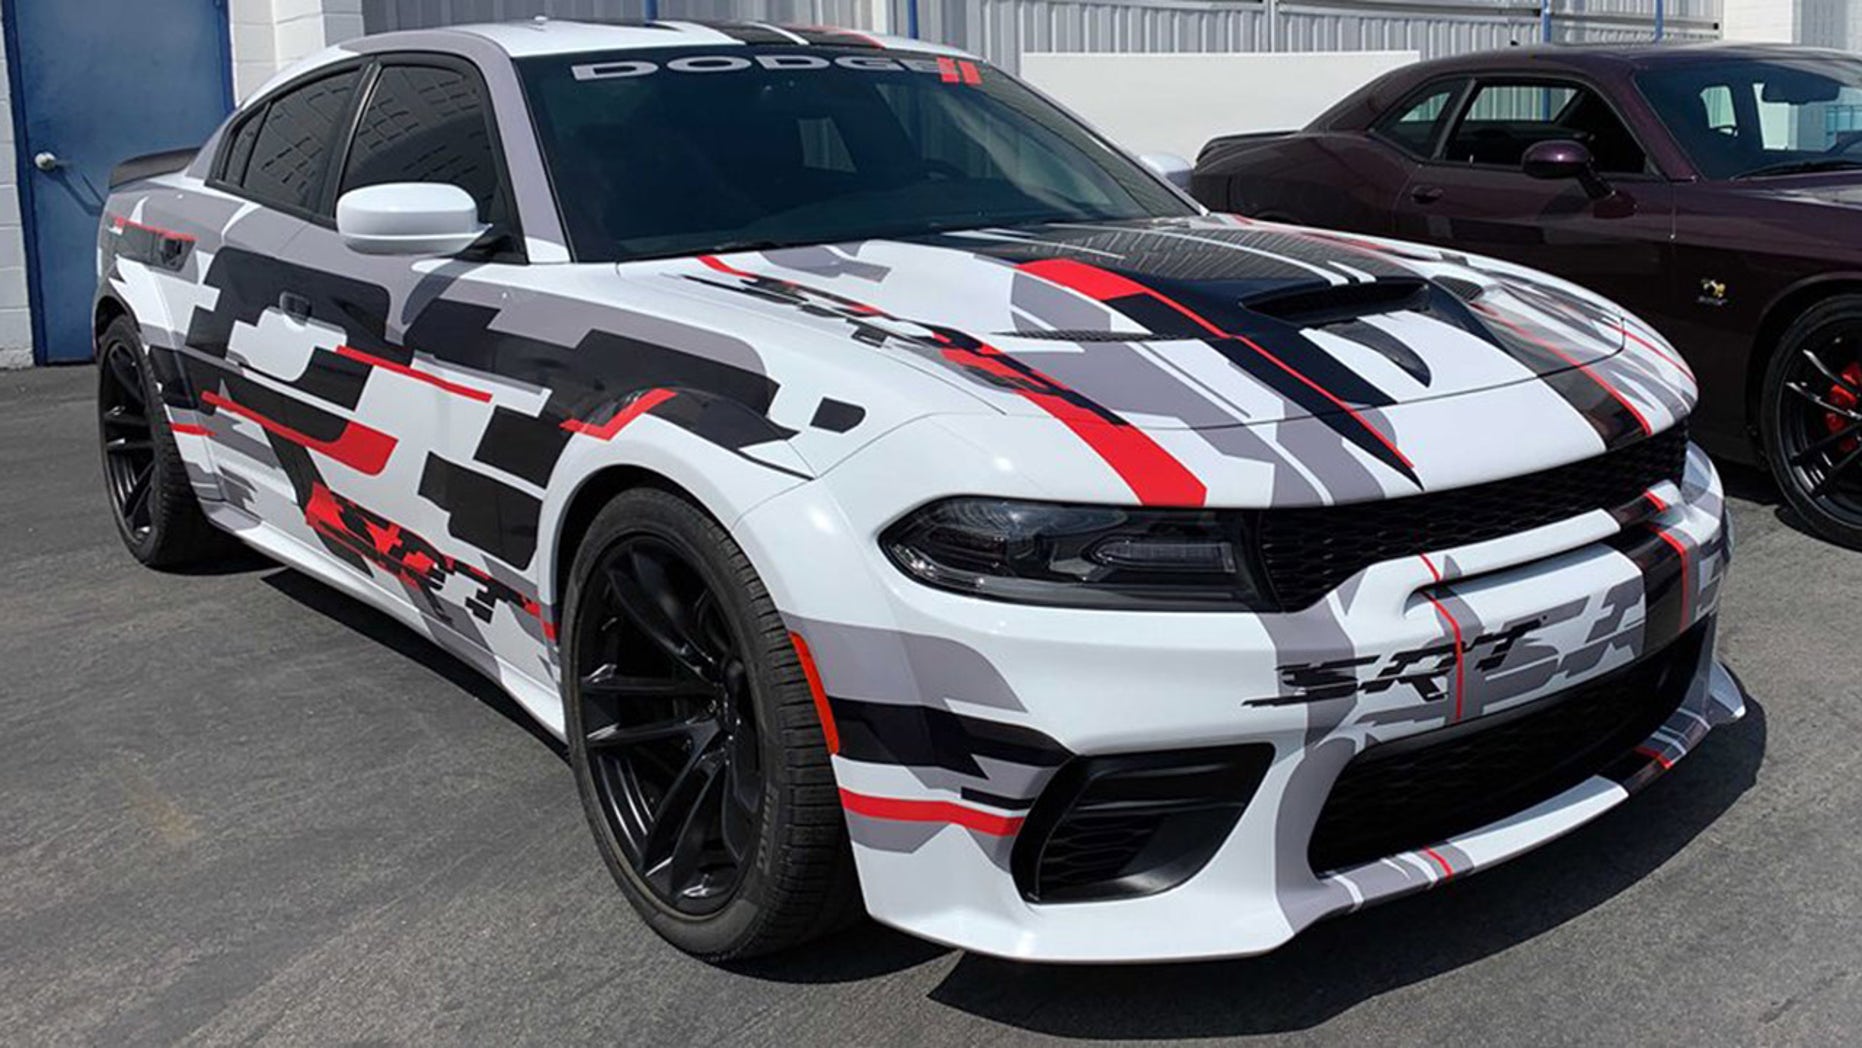 The Dodge Charger Hellcat Widebody is a fast road hog Fox News